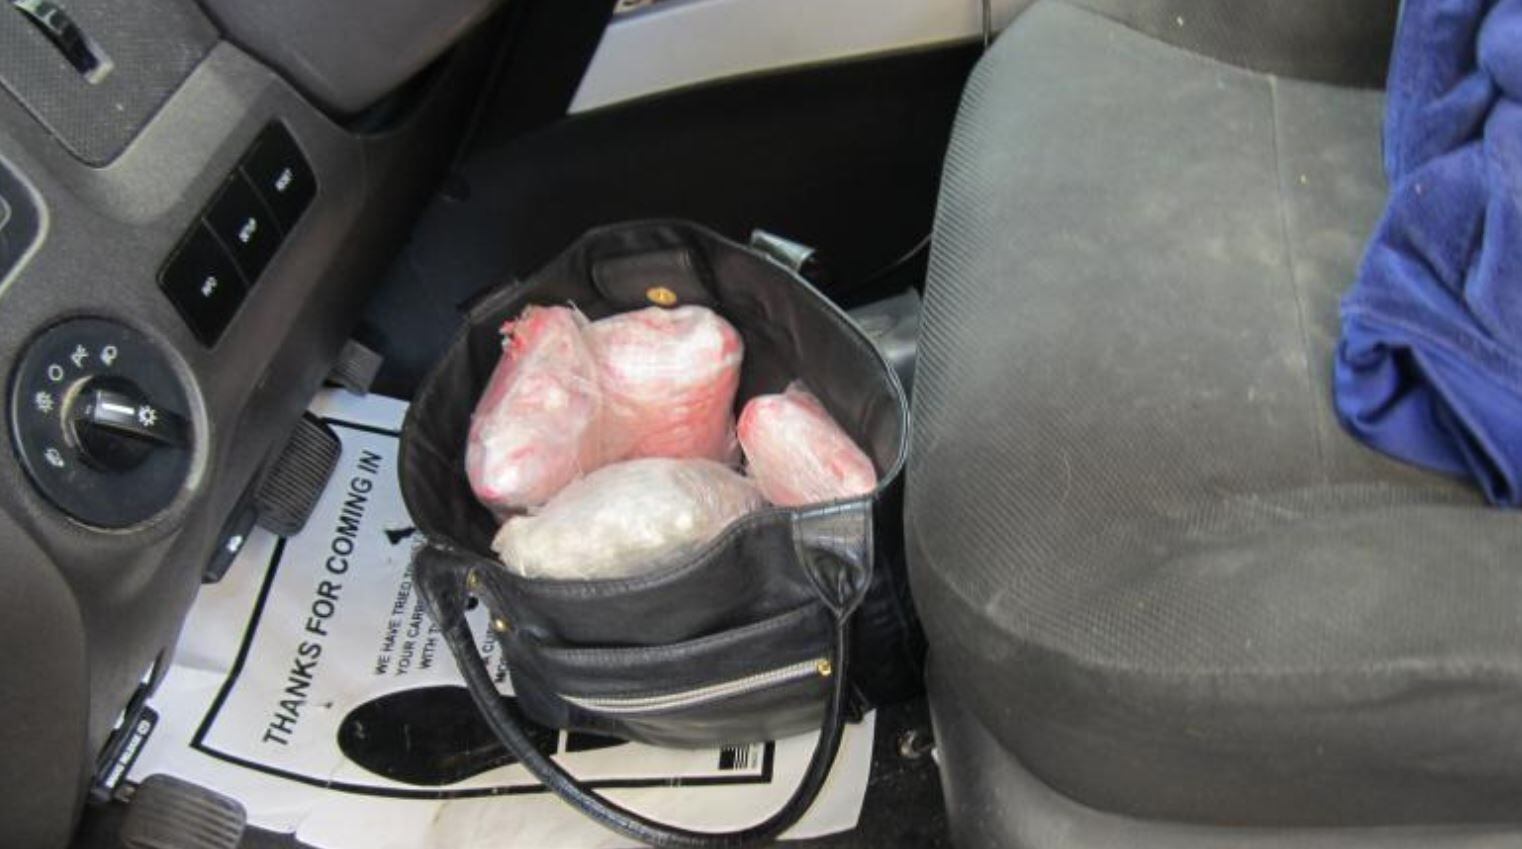 Borders agents found seven bundles of heroin in a Ford Escape being driven by a U.S. citizen.